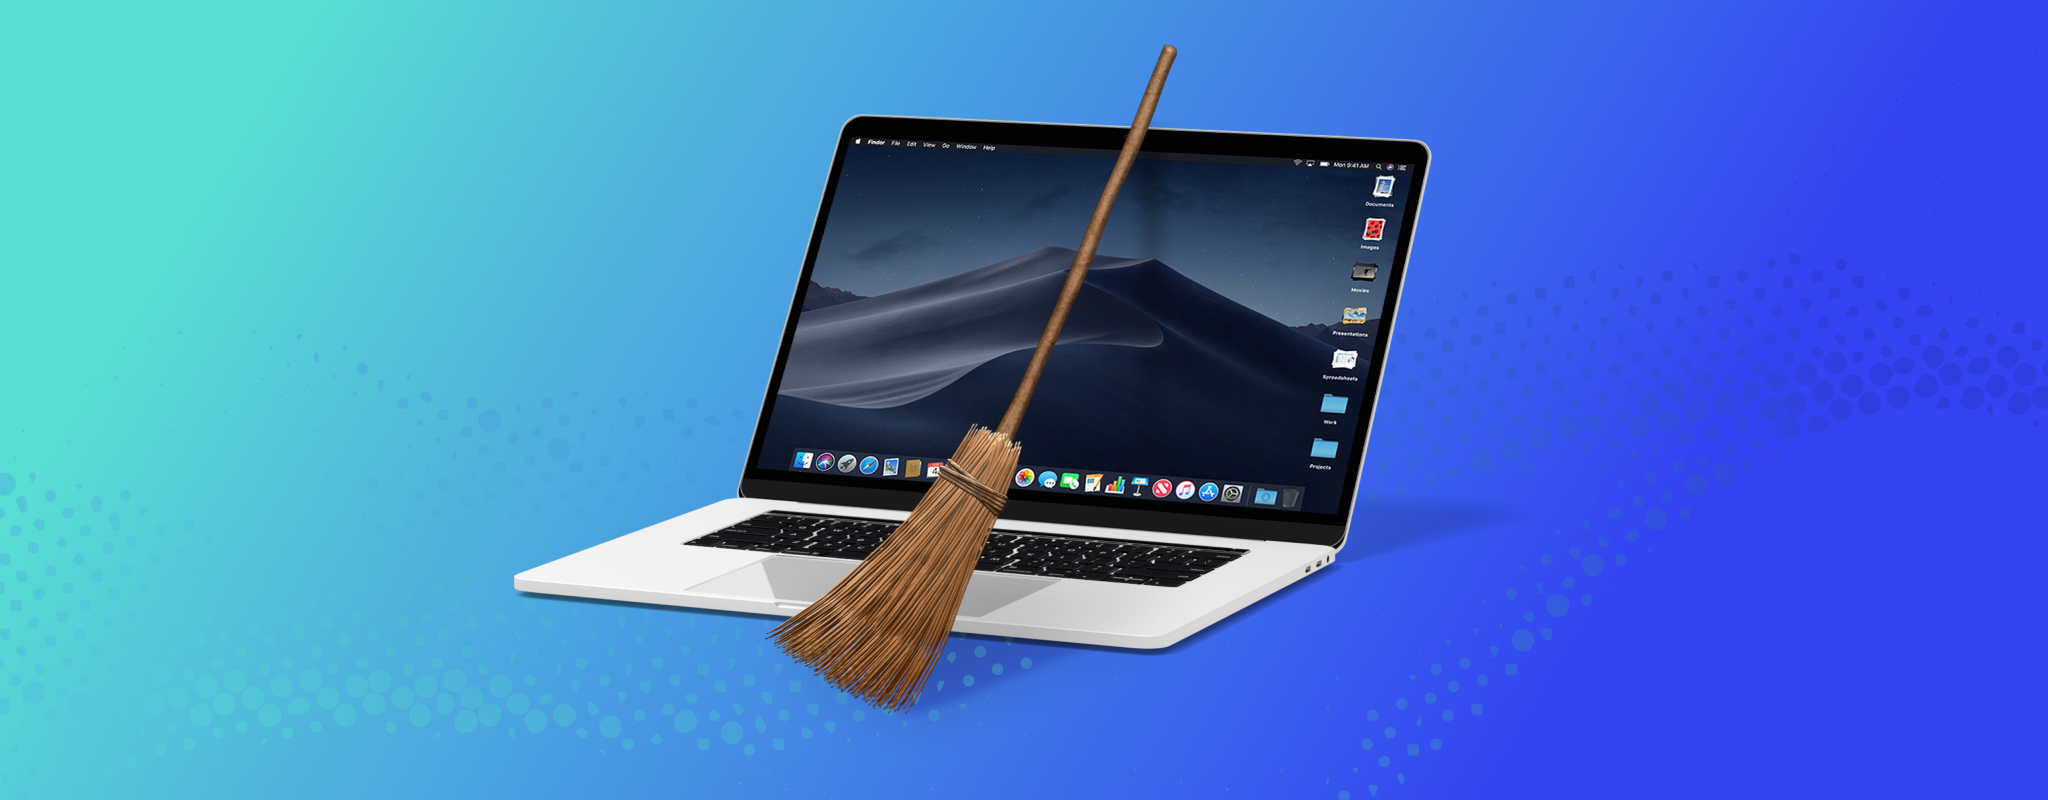 free app removal for mac 10.6.8